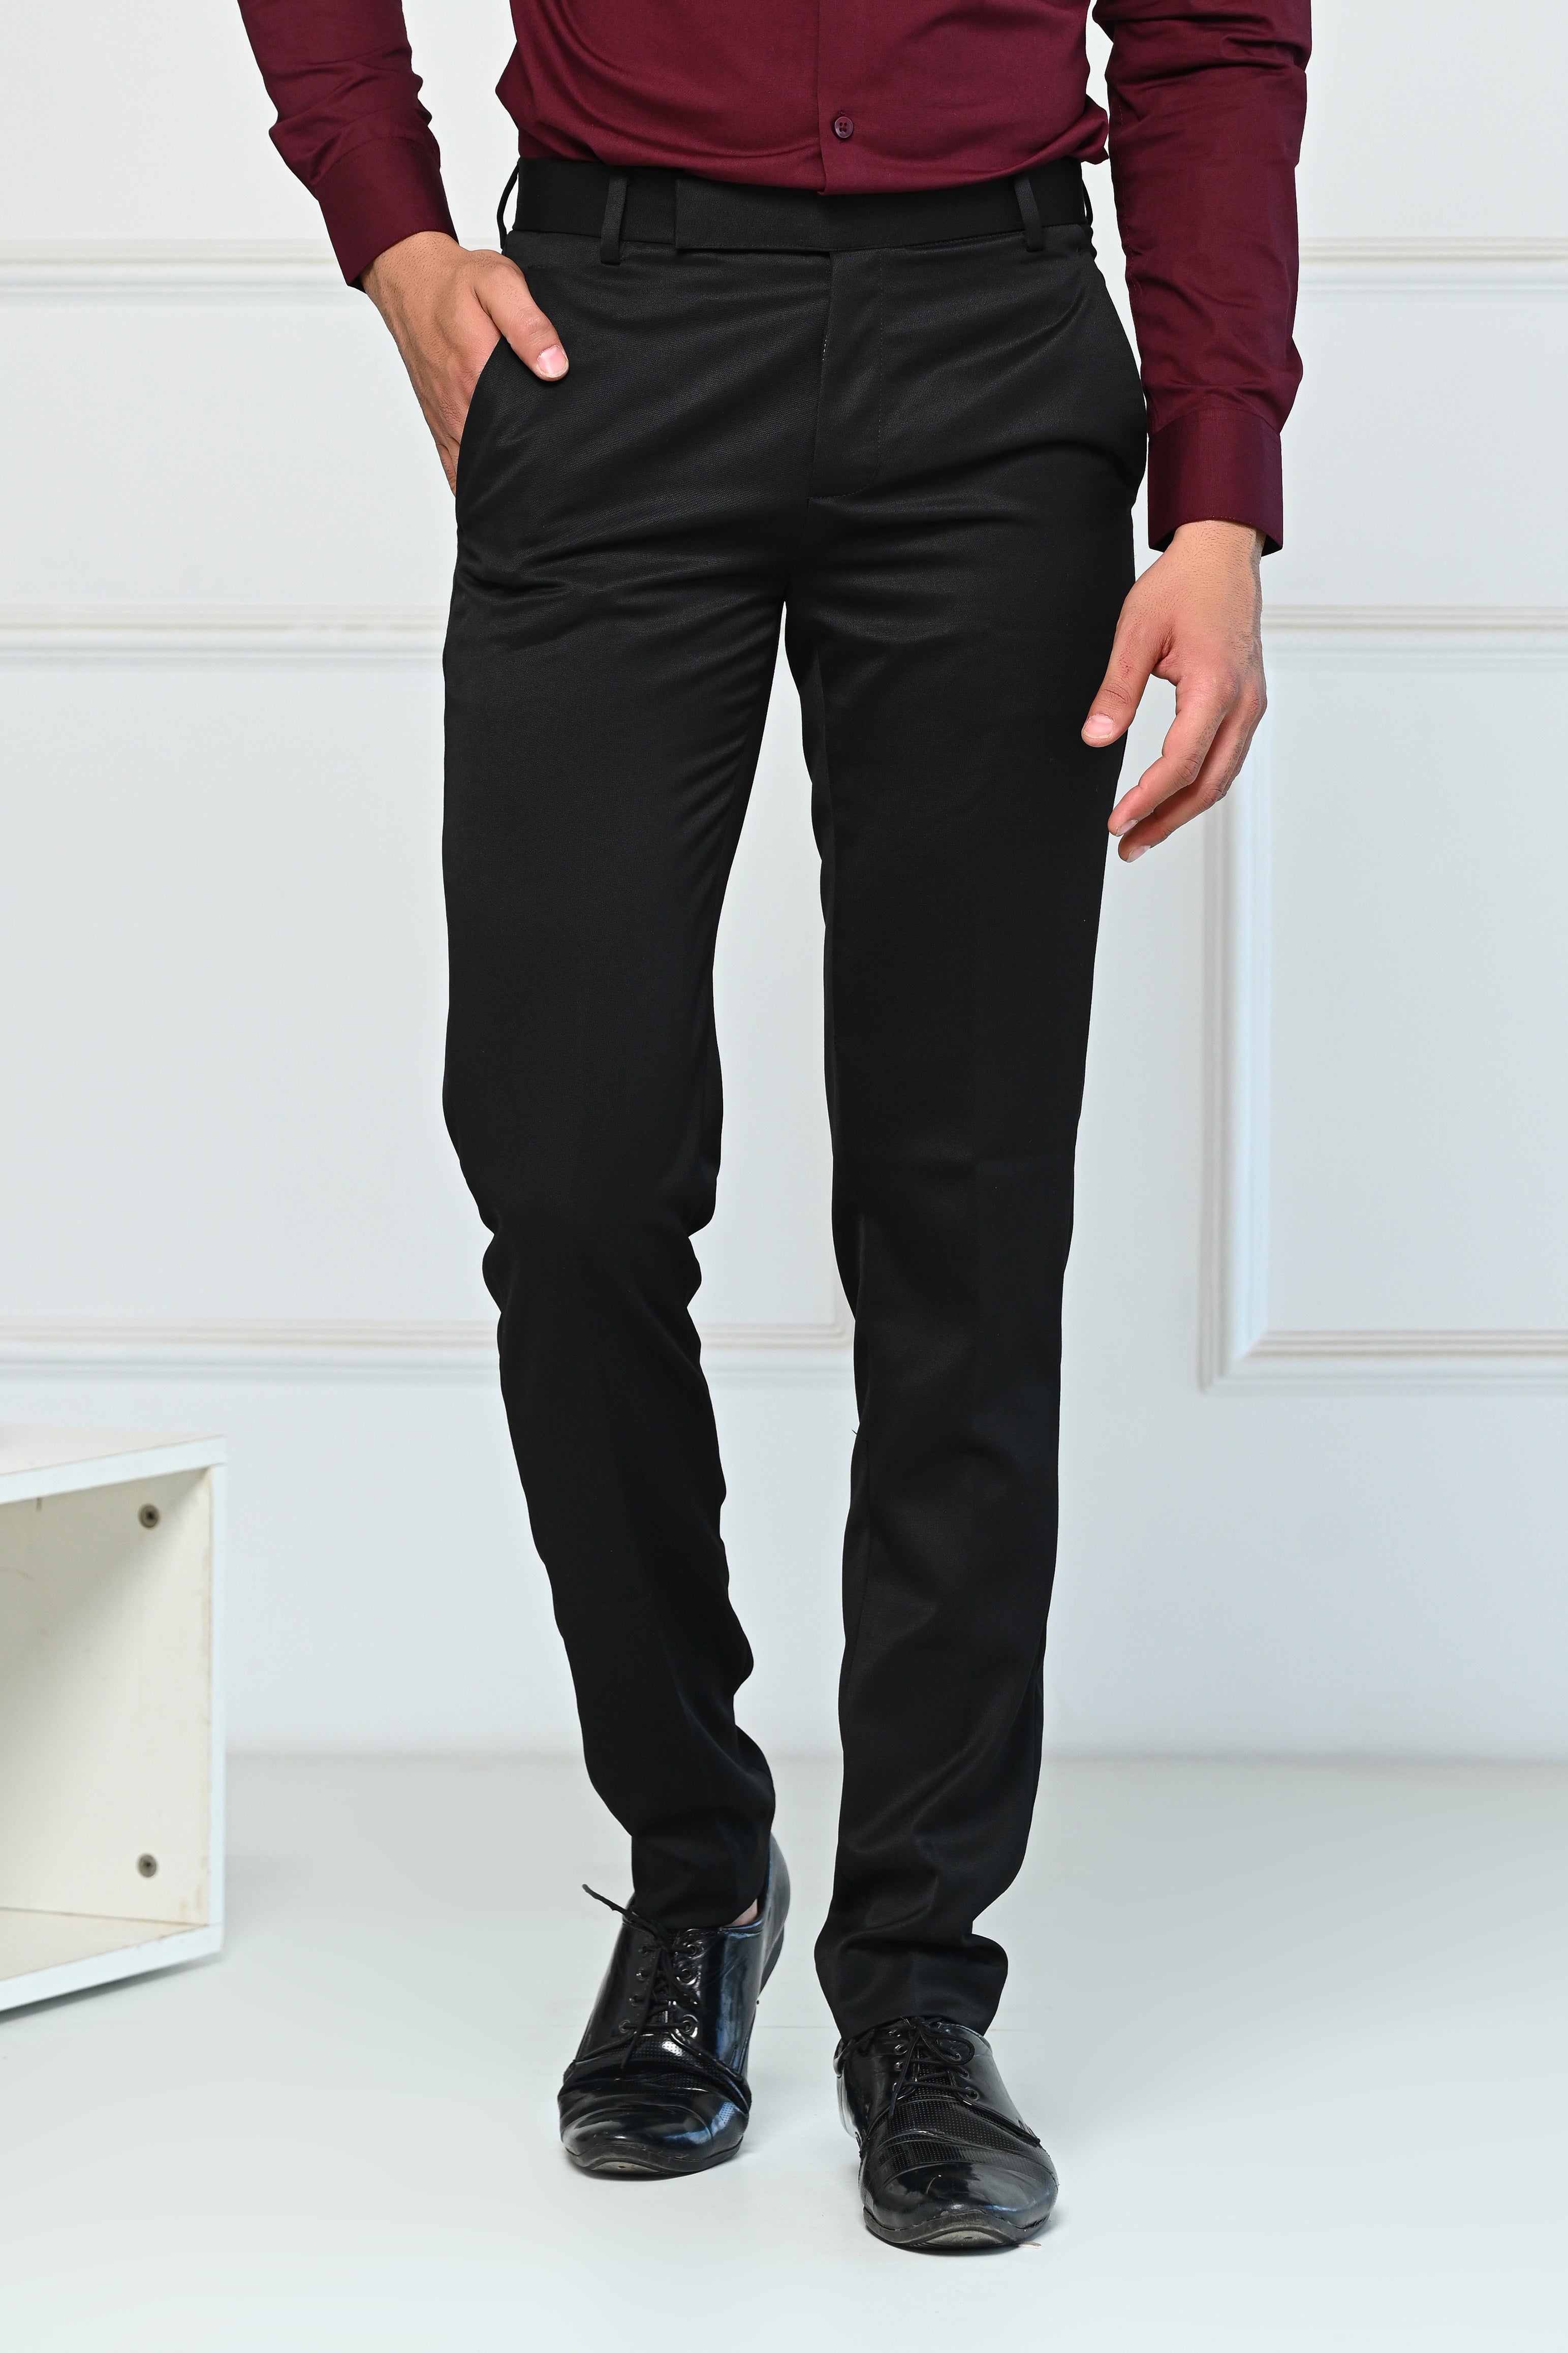 Cotton Straight Pants  Stretchable Formal Pants  Get Upto30 off